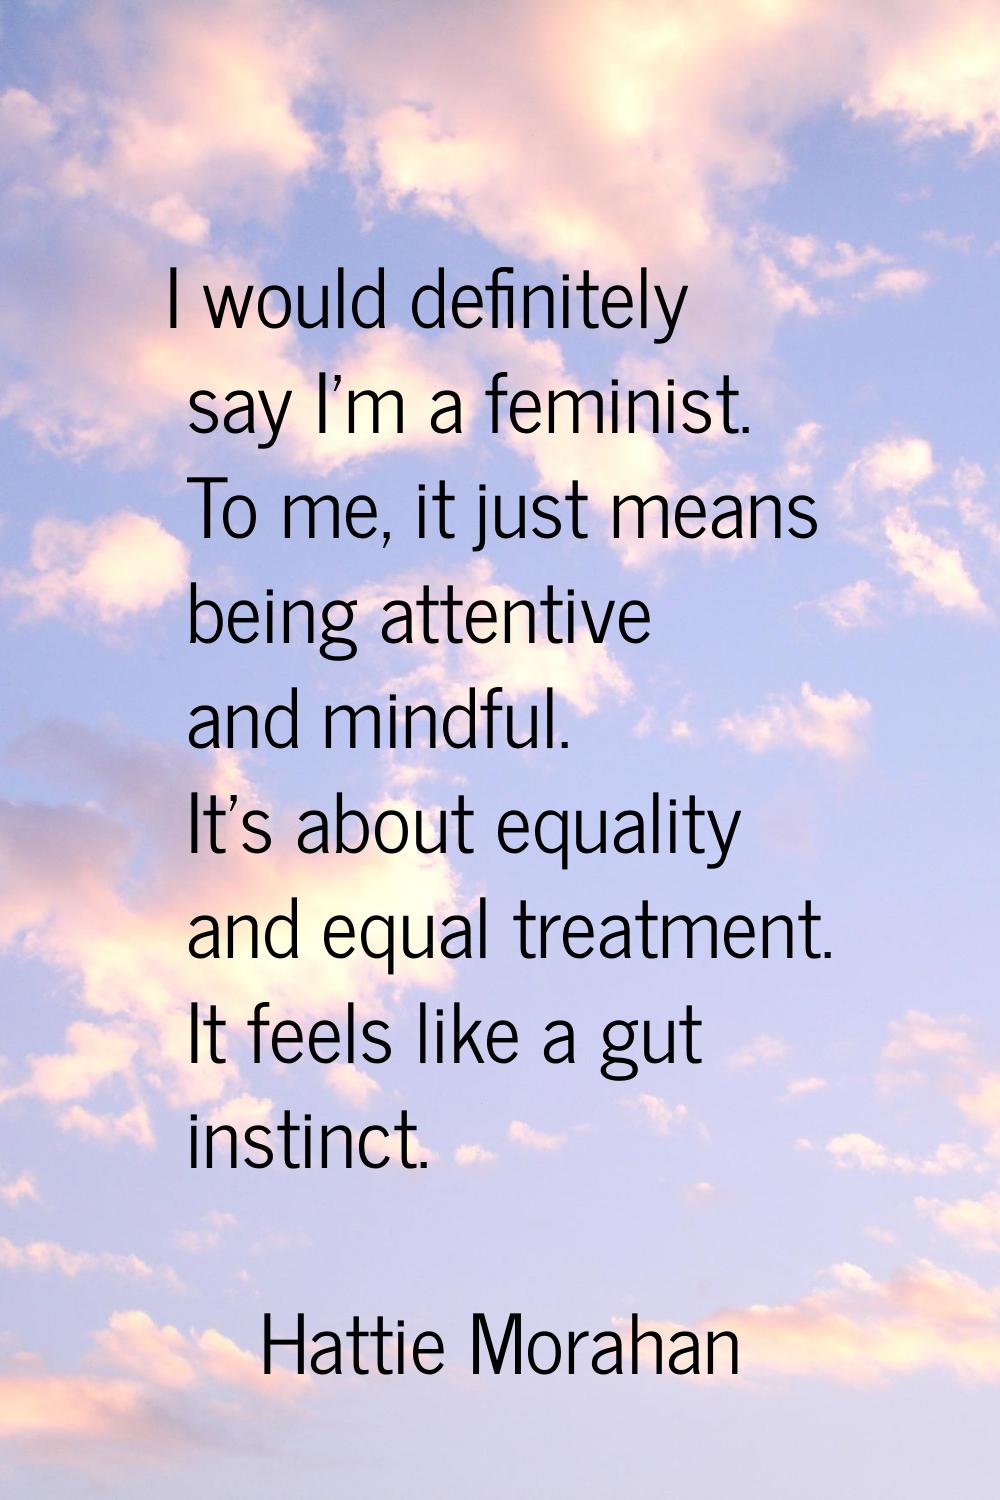 I would definitely say I'm a feminist. To me, it just means being attentive and mindful. It's about